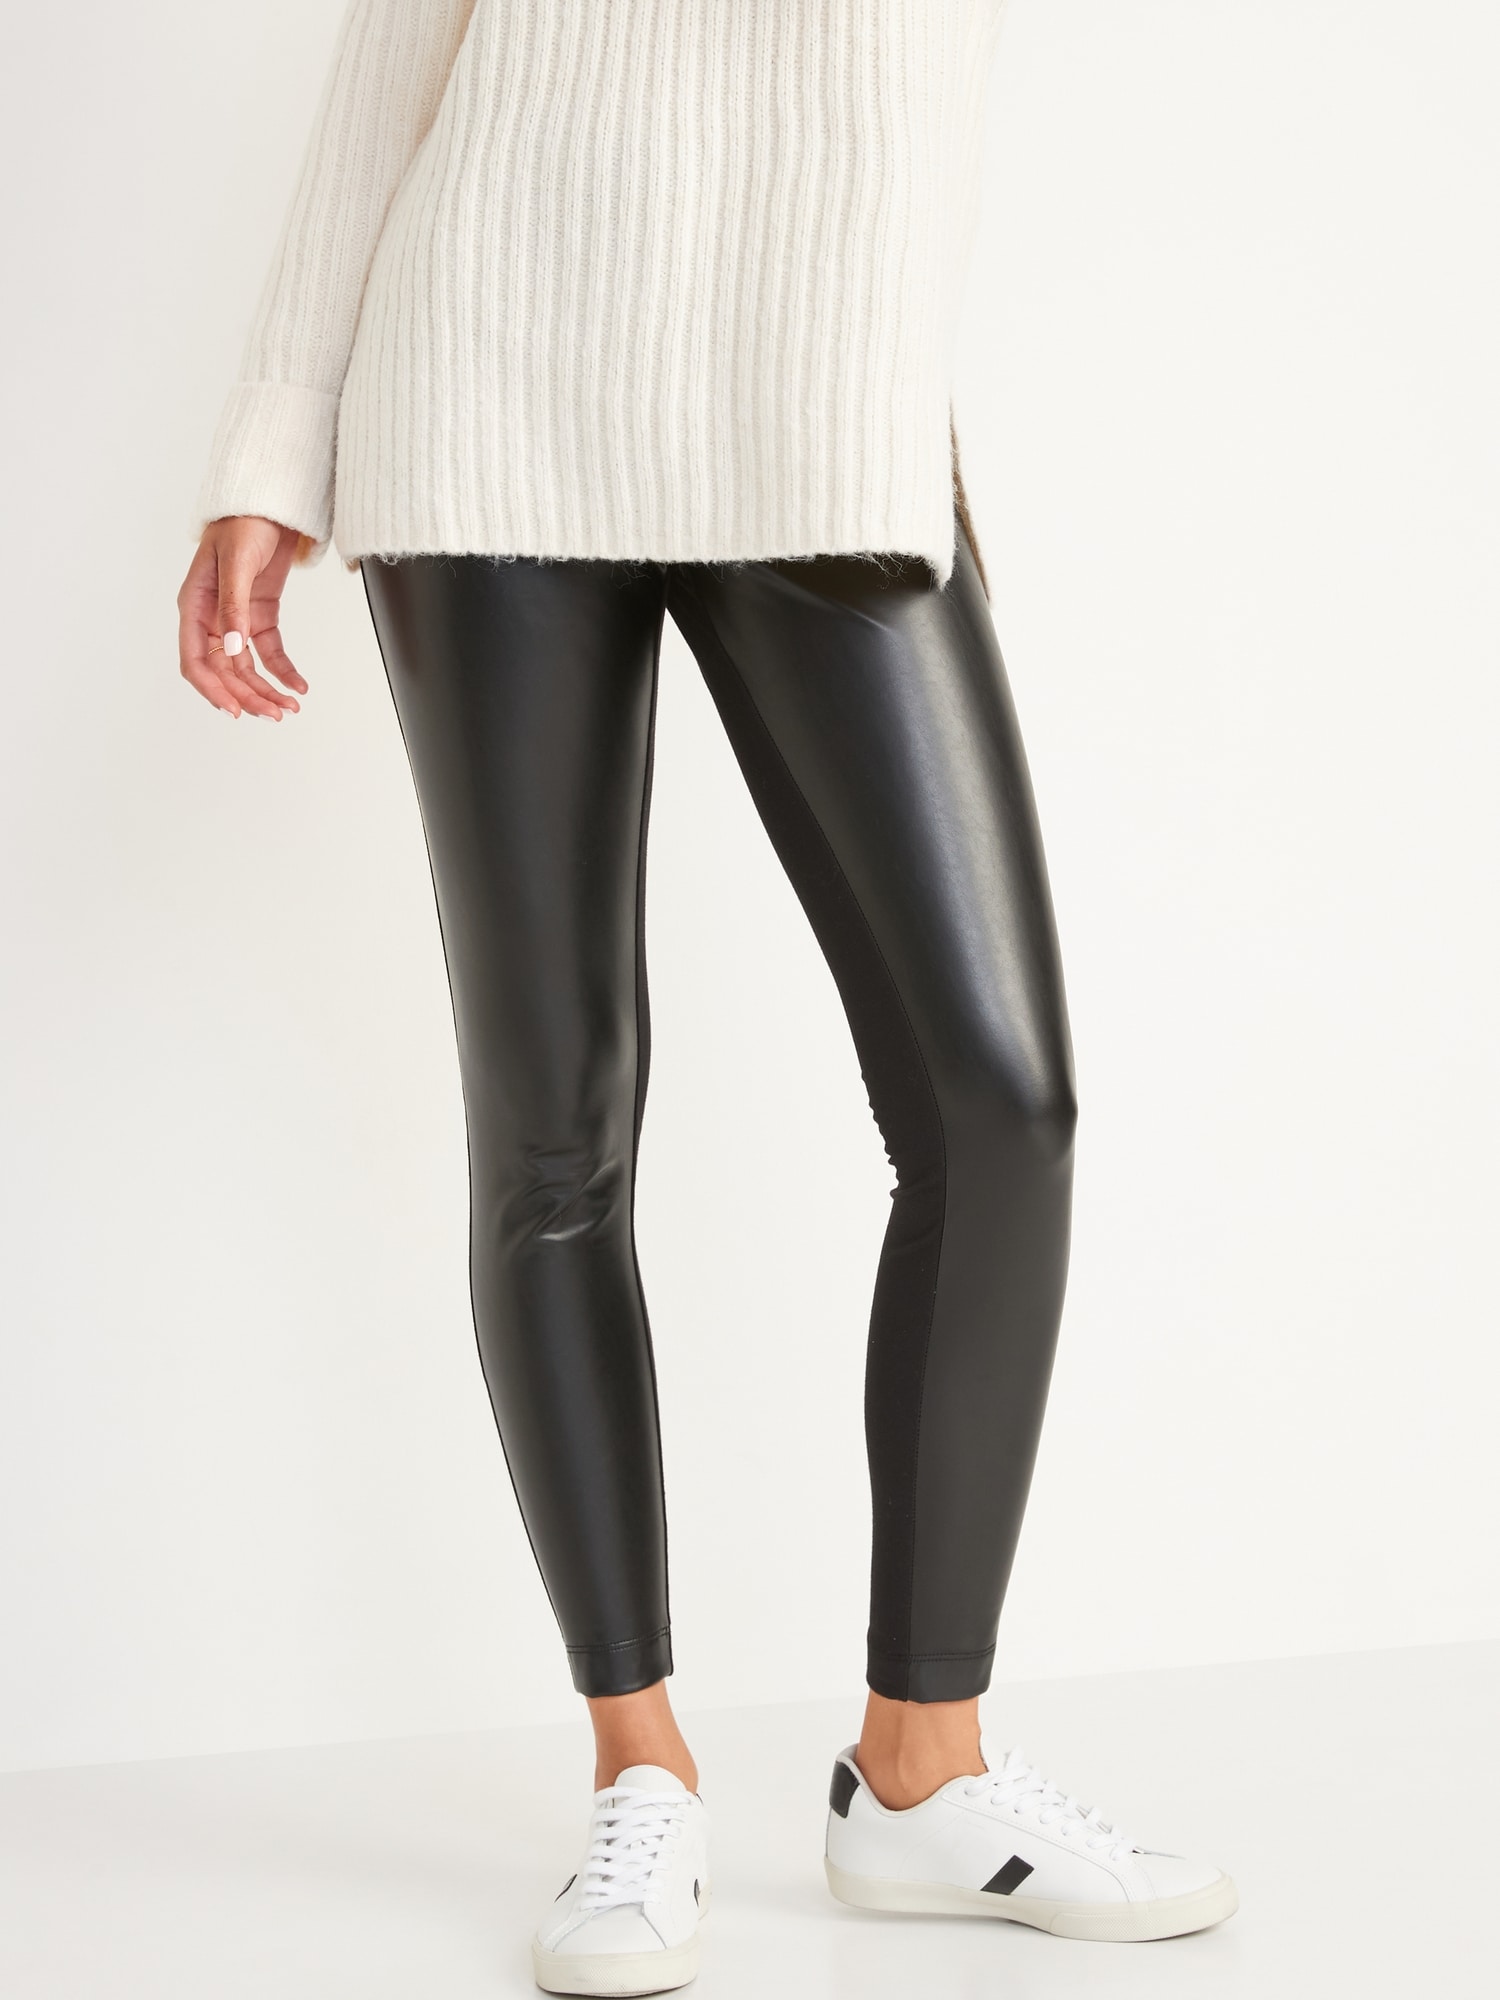 Next Tall Leather Look Leggings For Women Size 7